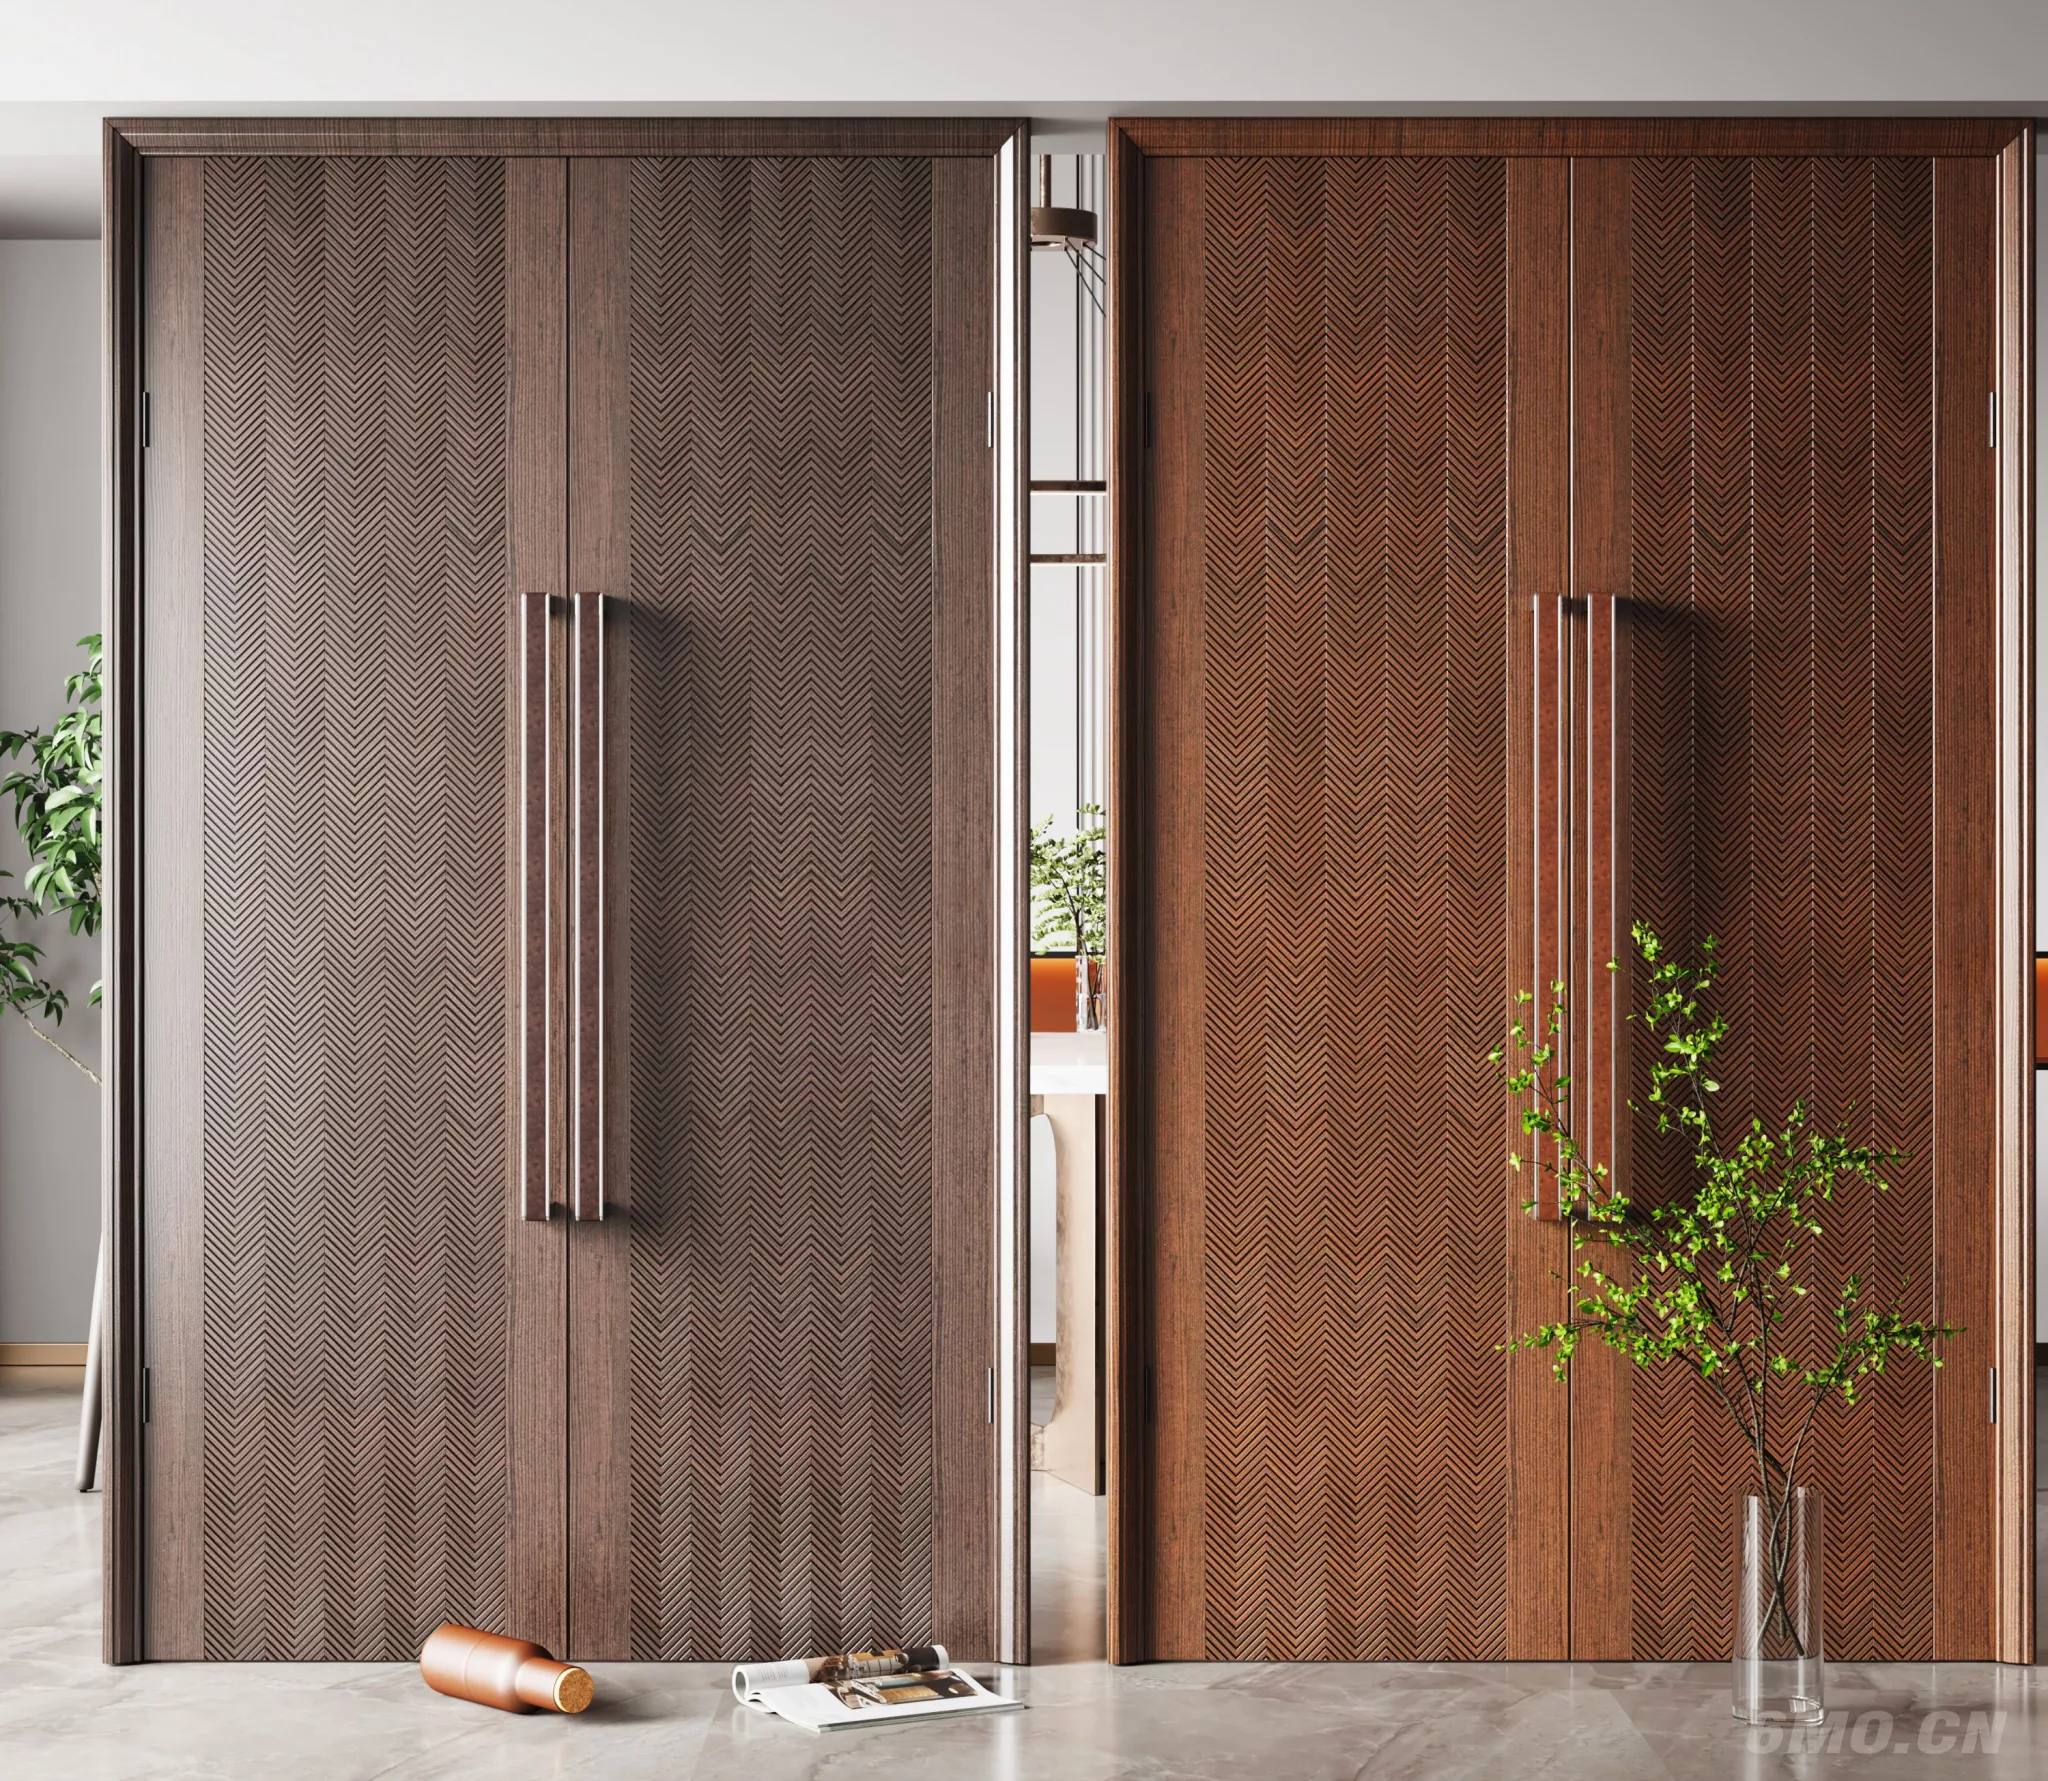 CHINESE DOOR AND WINDOWS - SKETCHUP 3D MODEL - VRAY - 244196